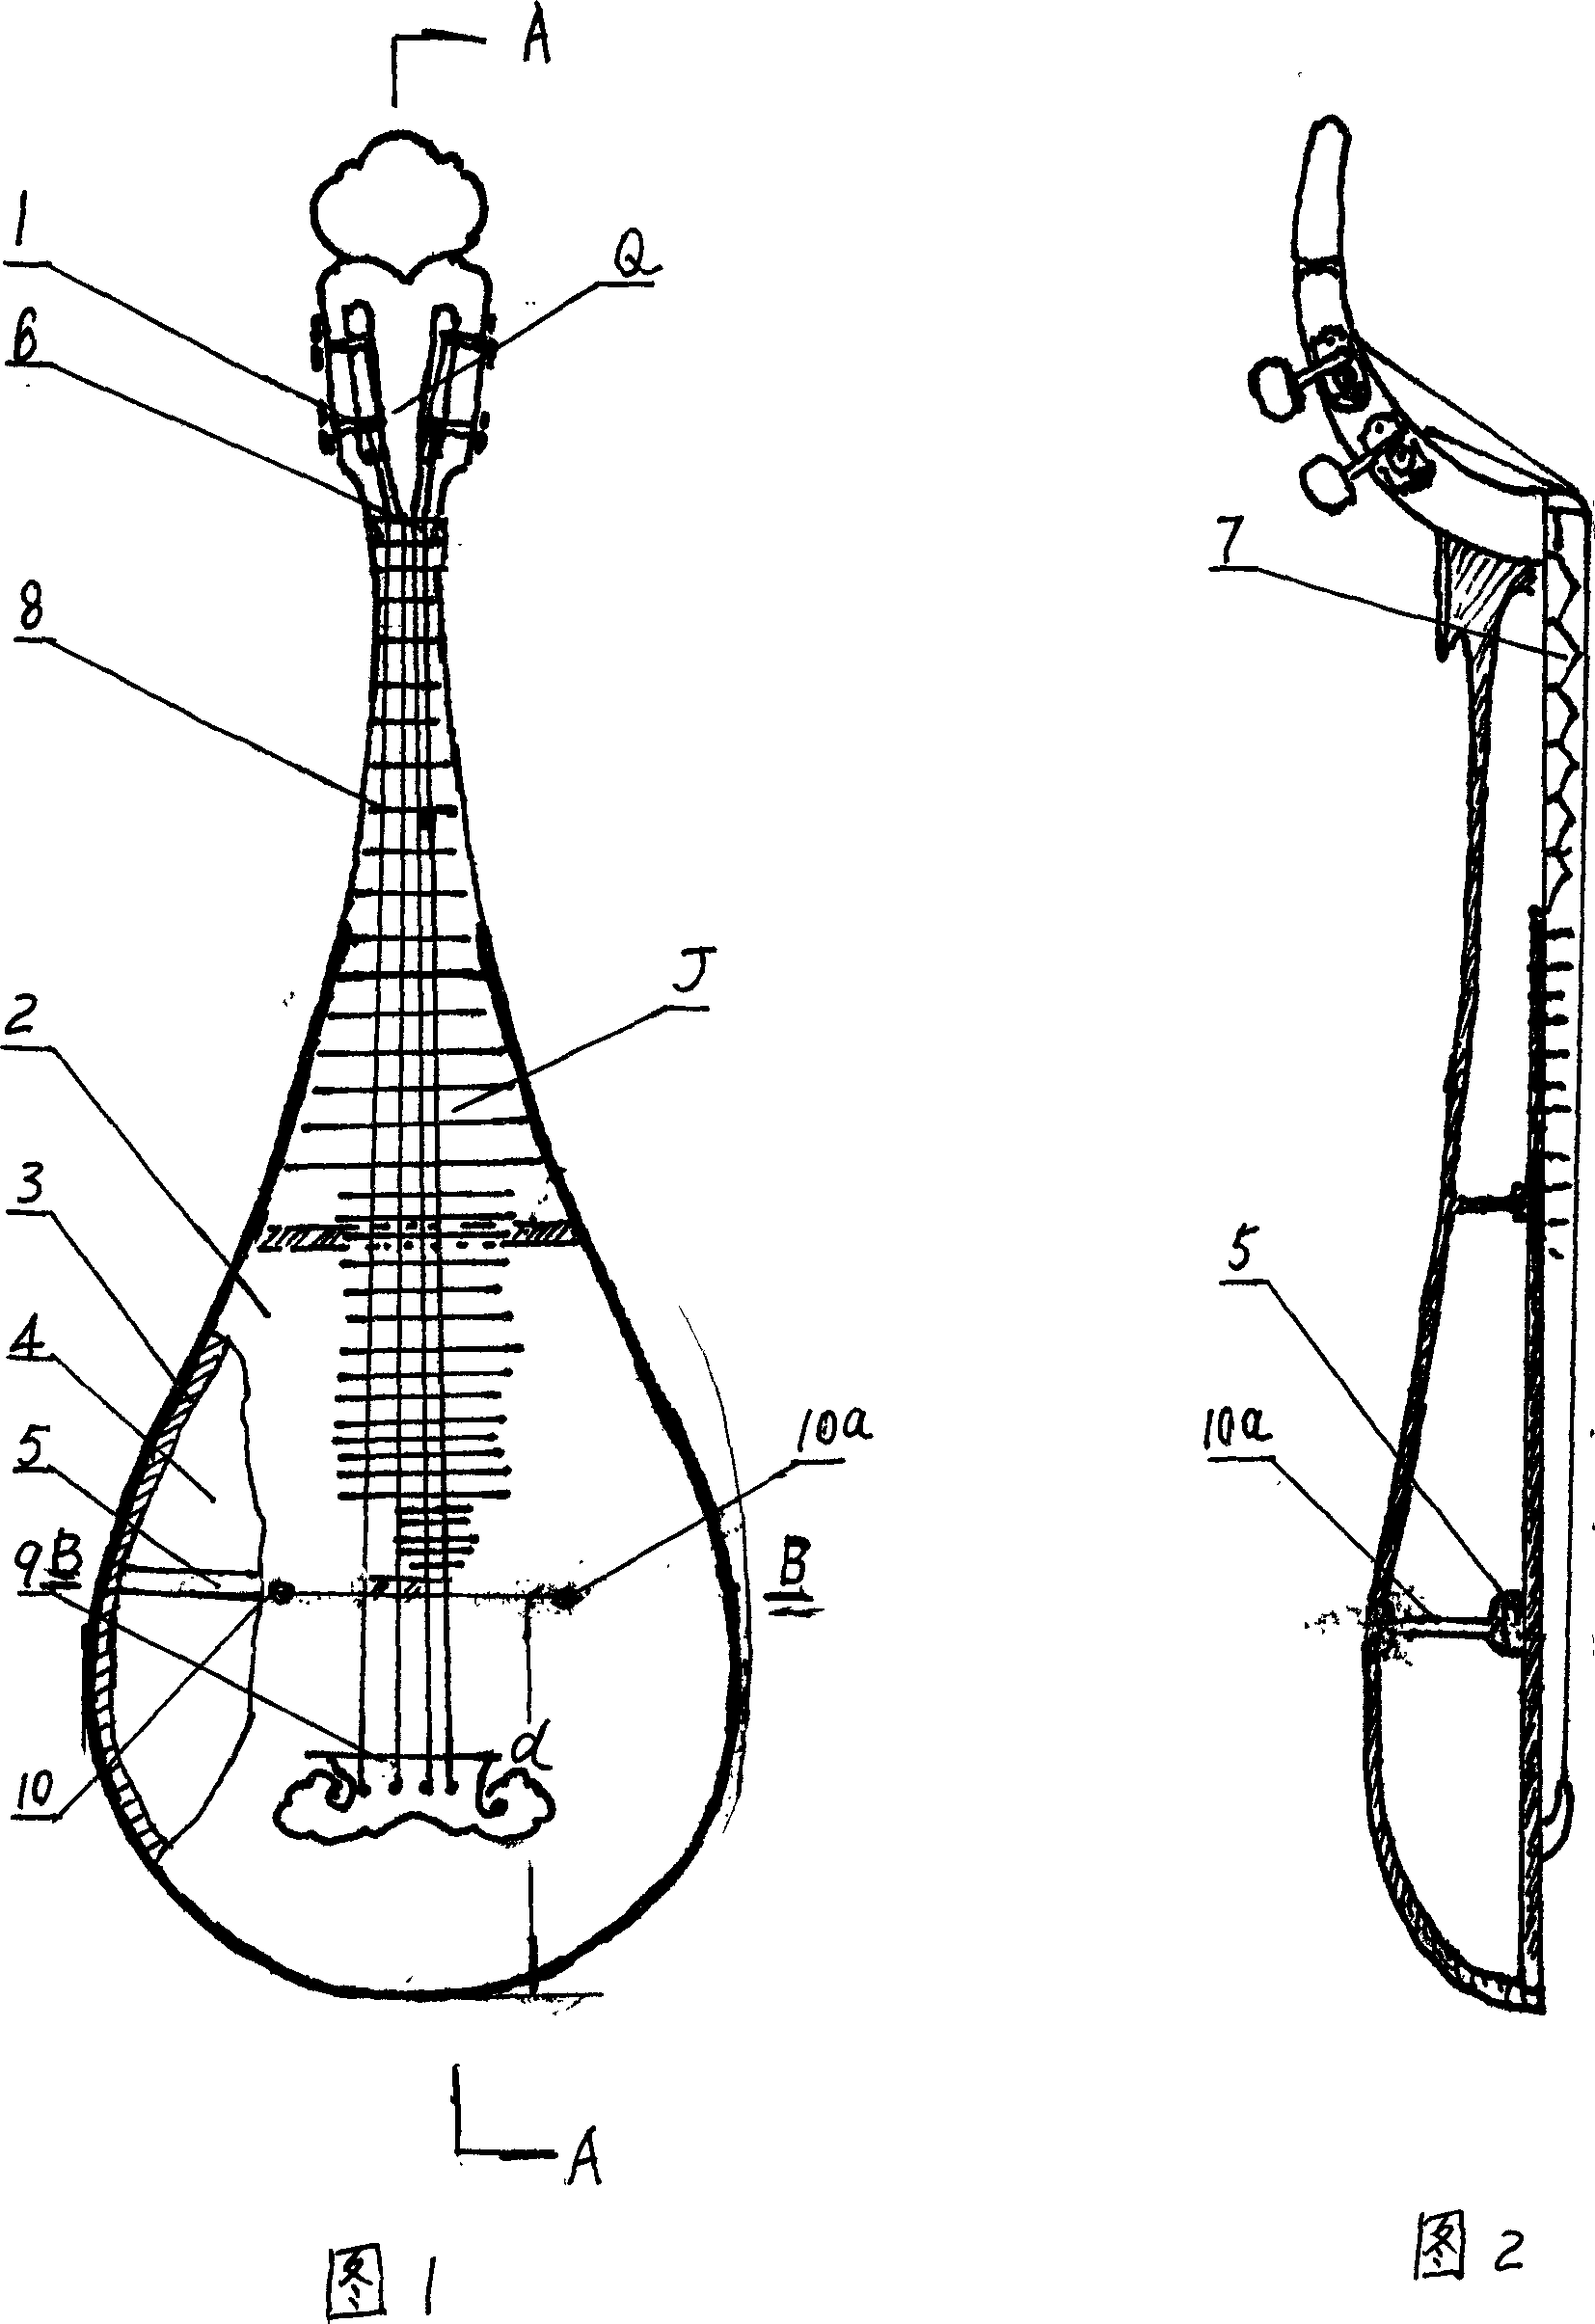 An improved lute and its making method